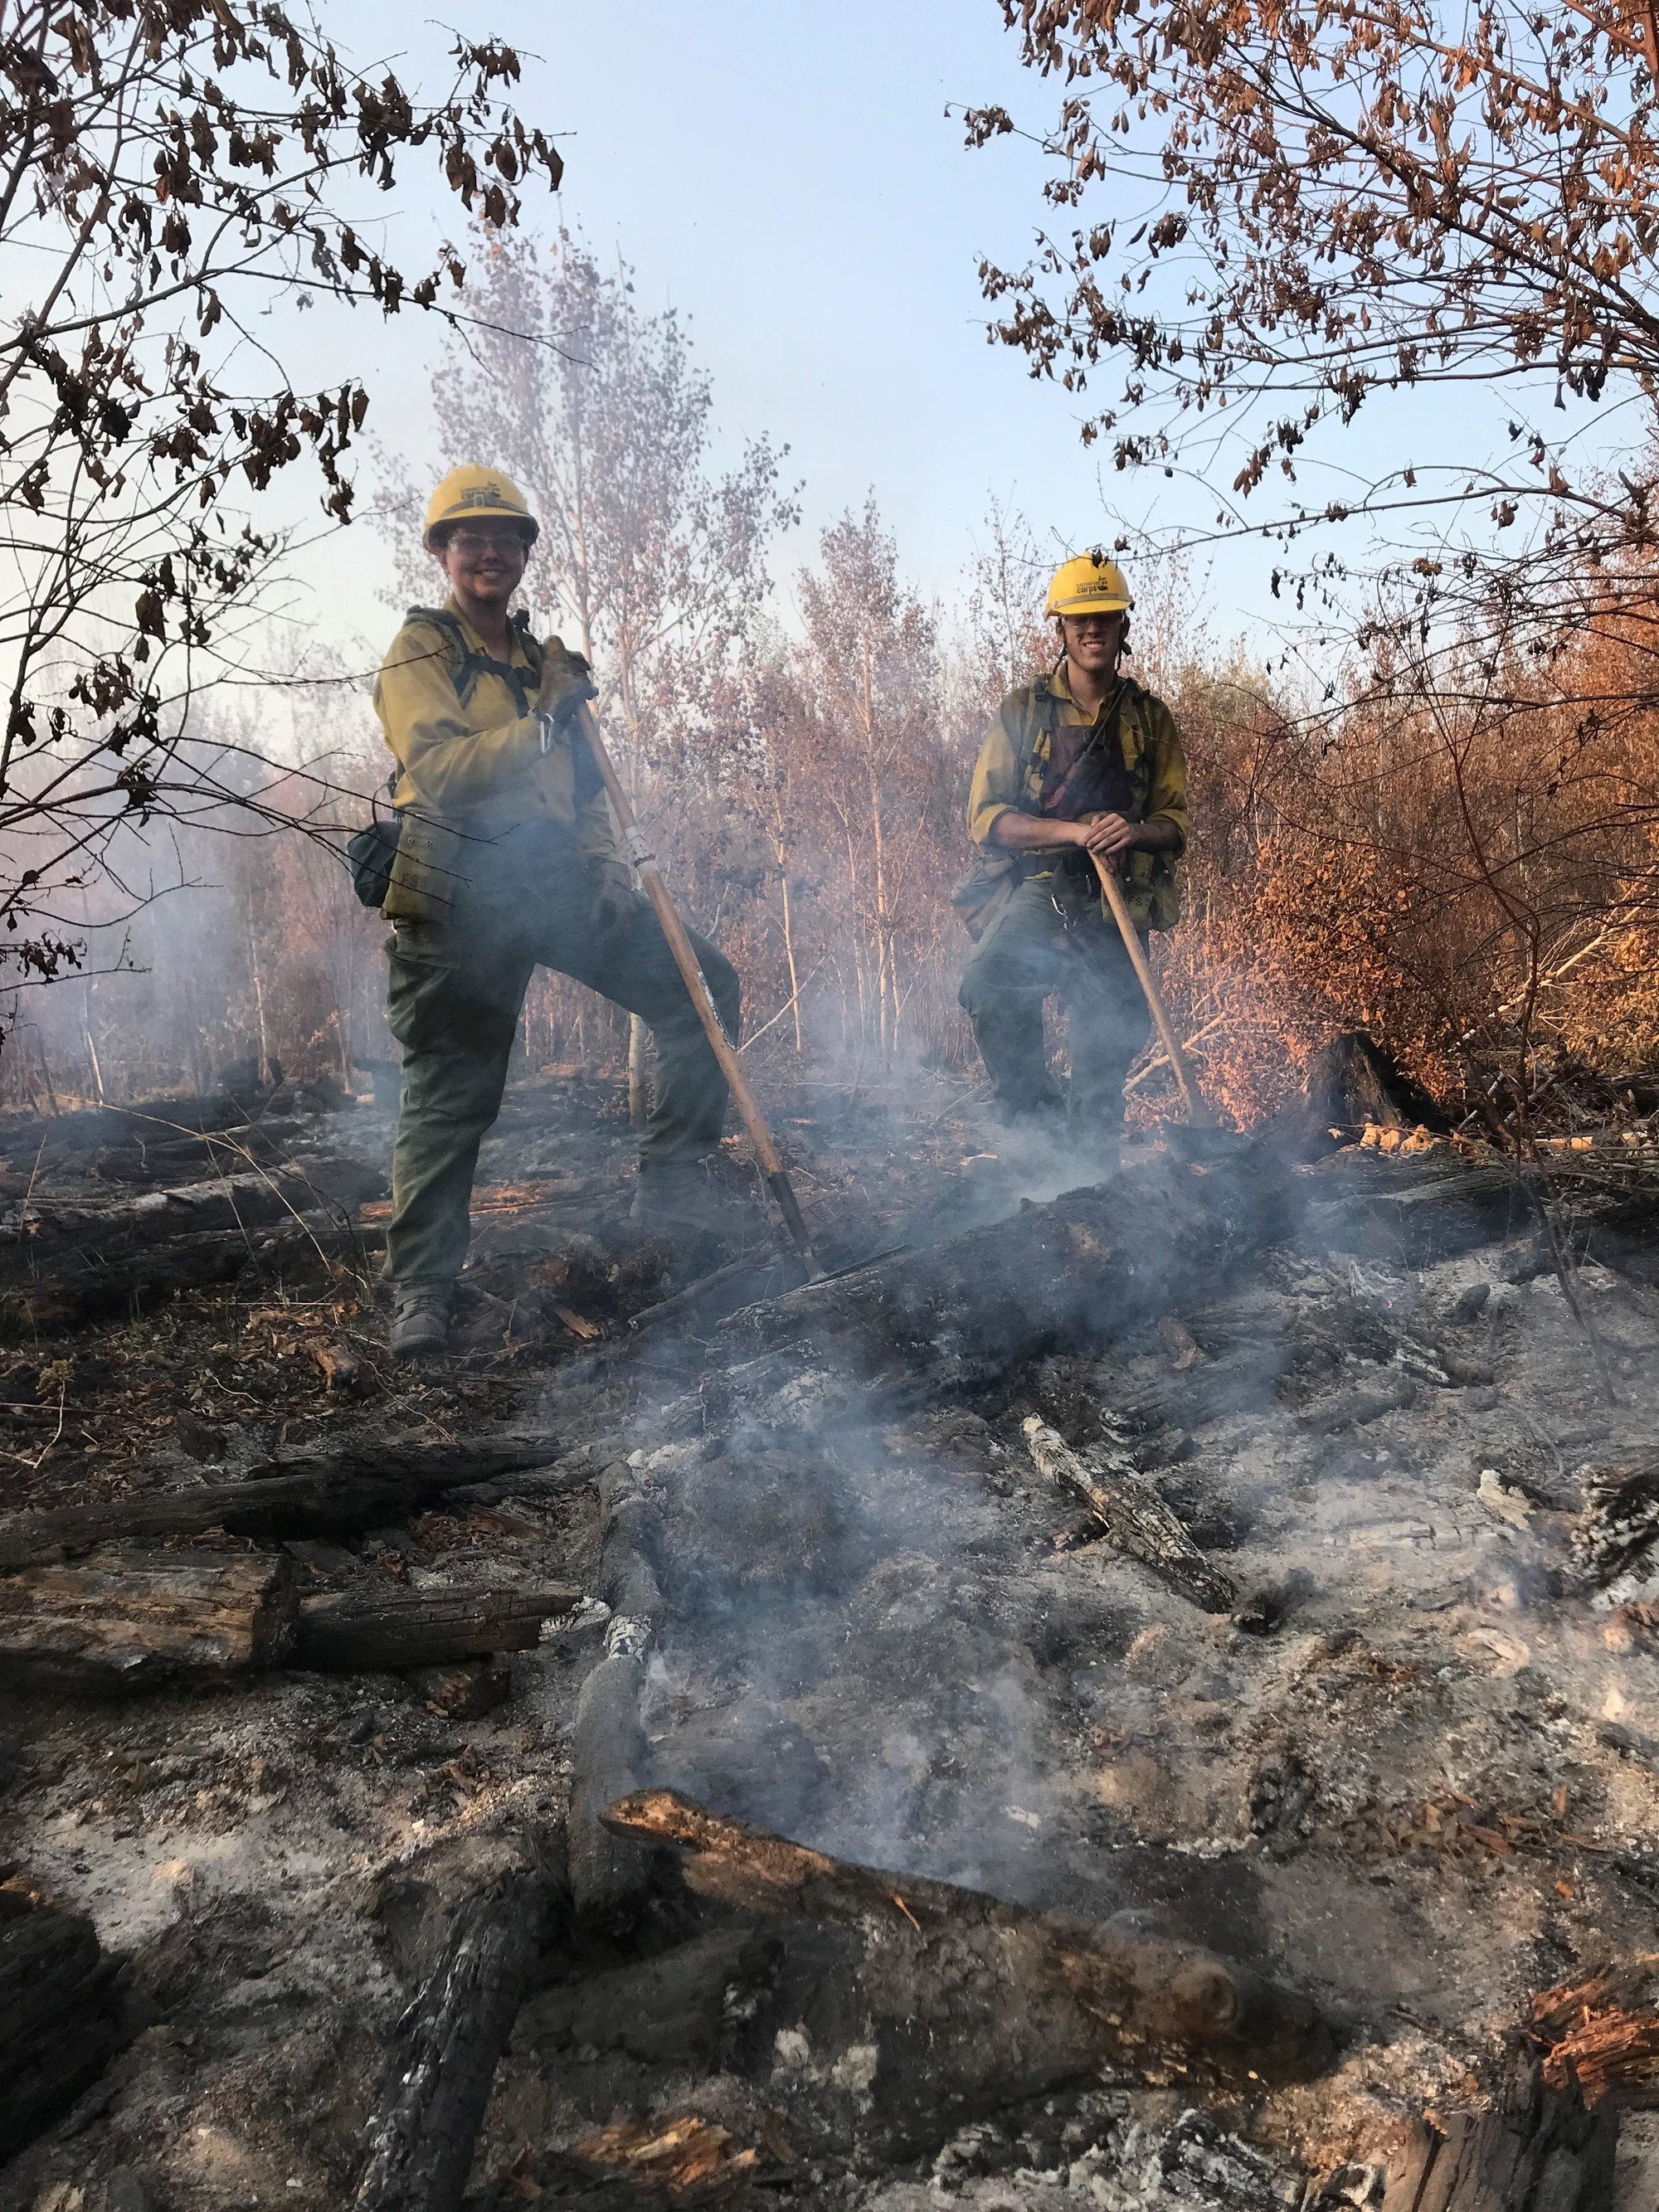 two firefighters standing in smoky blackened area holding hand tools